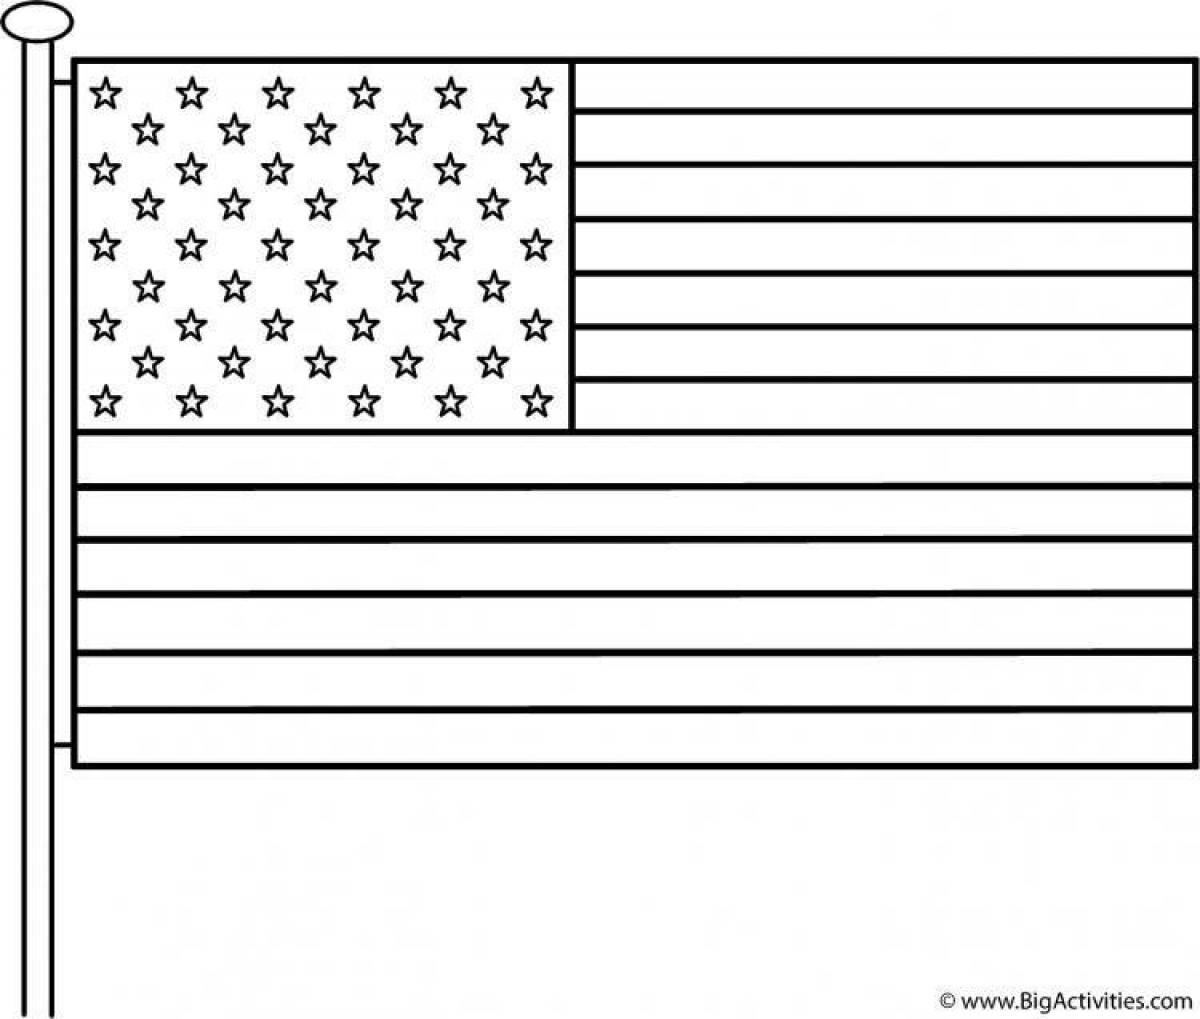 Dazzling American flag coloring page